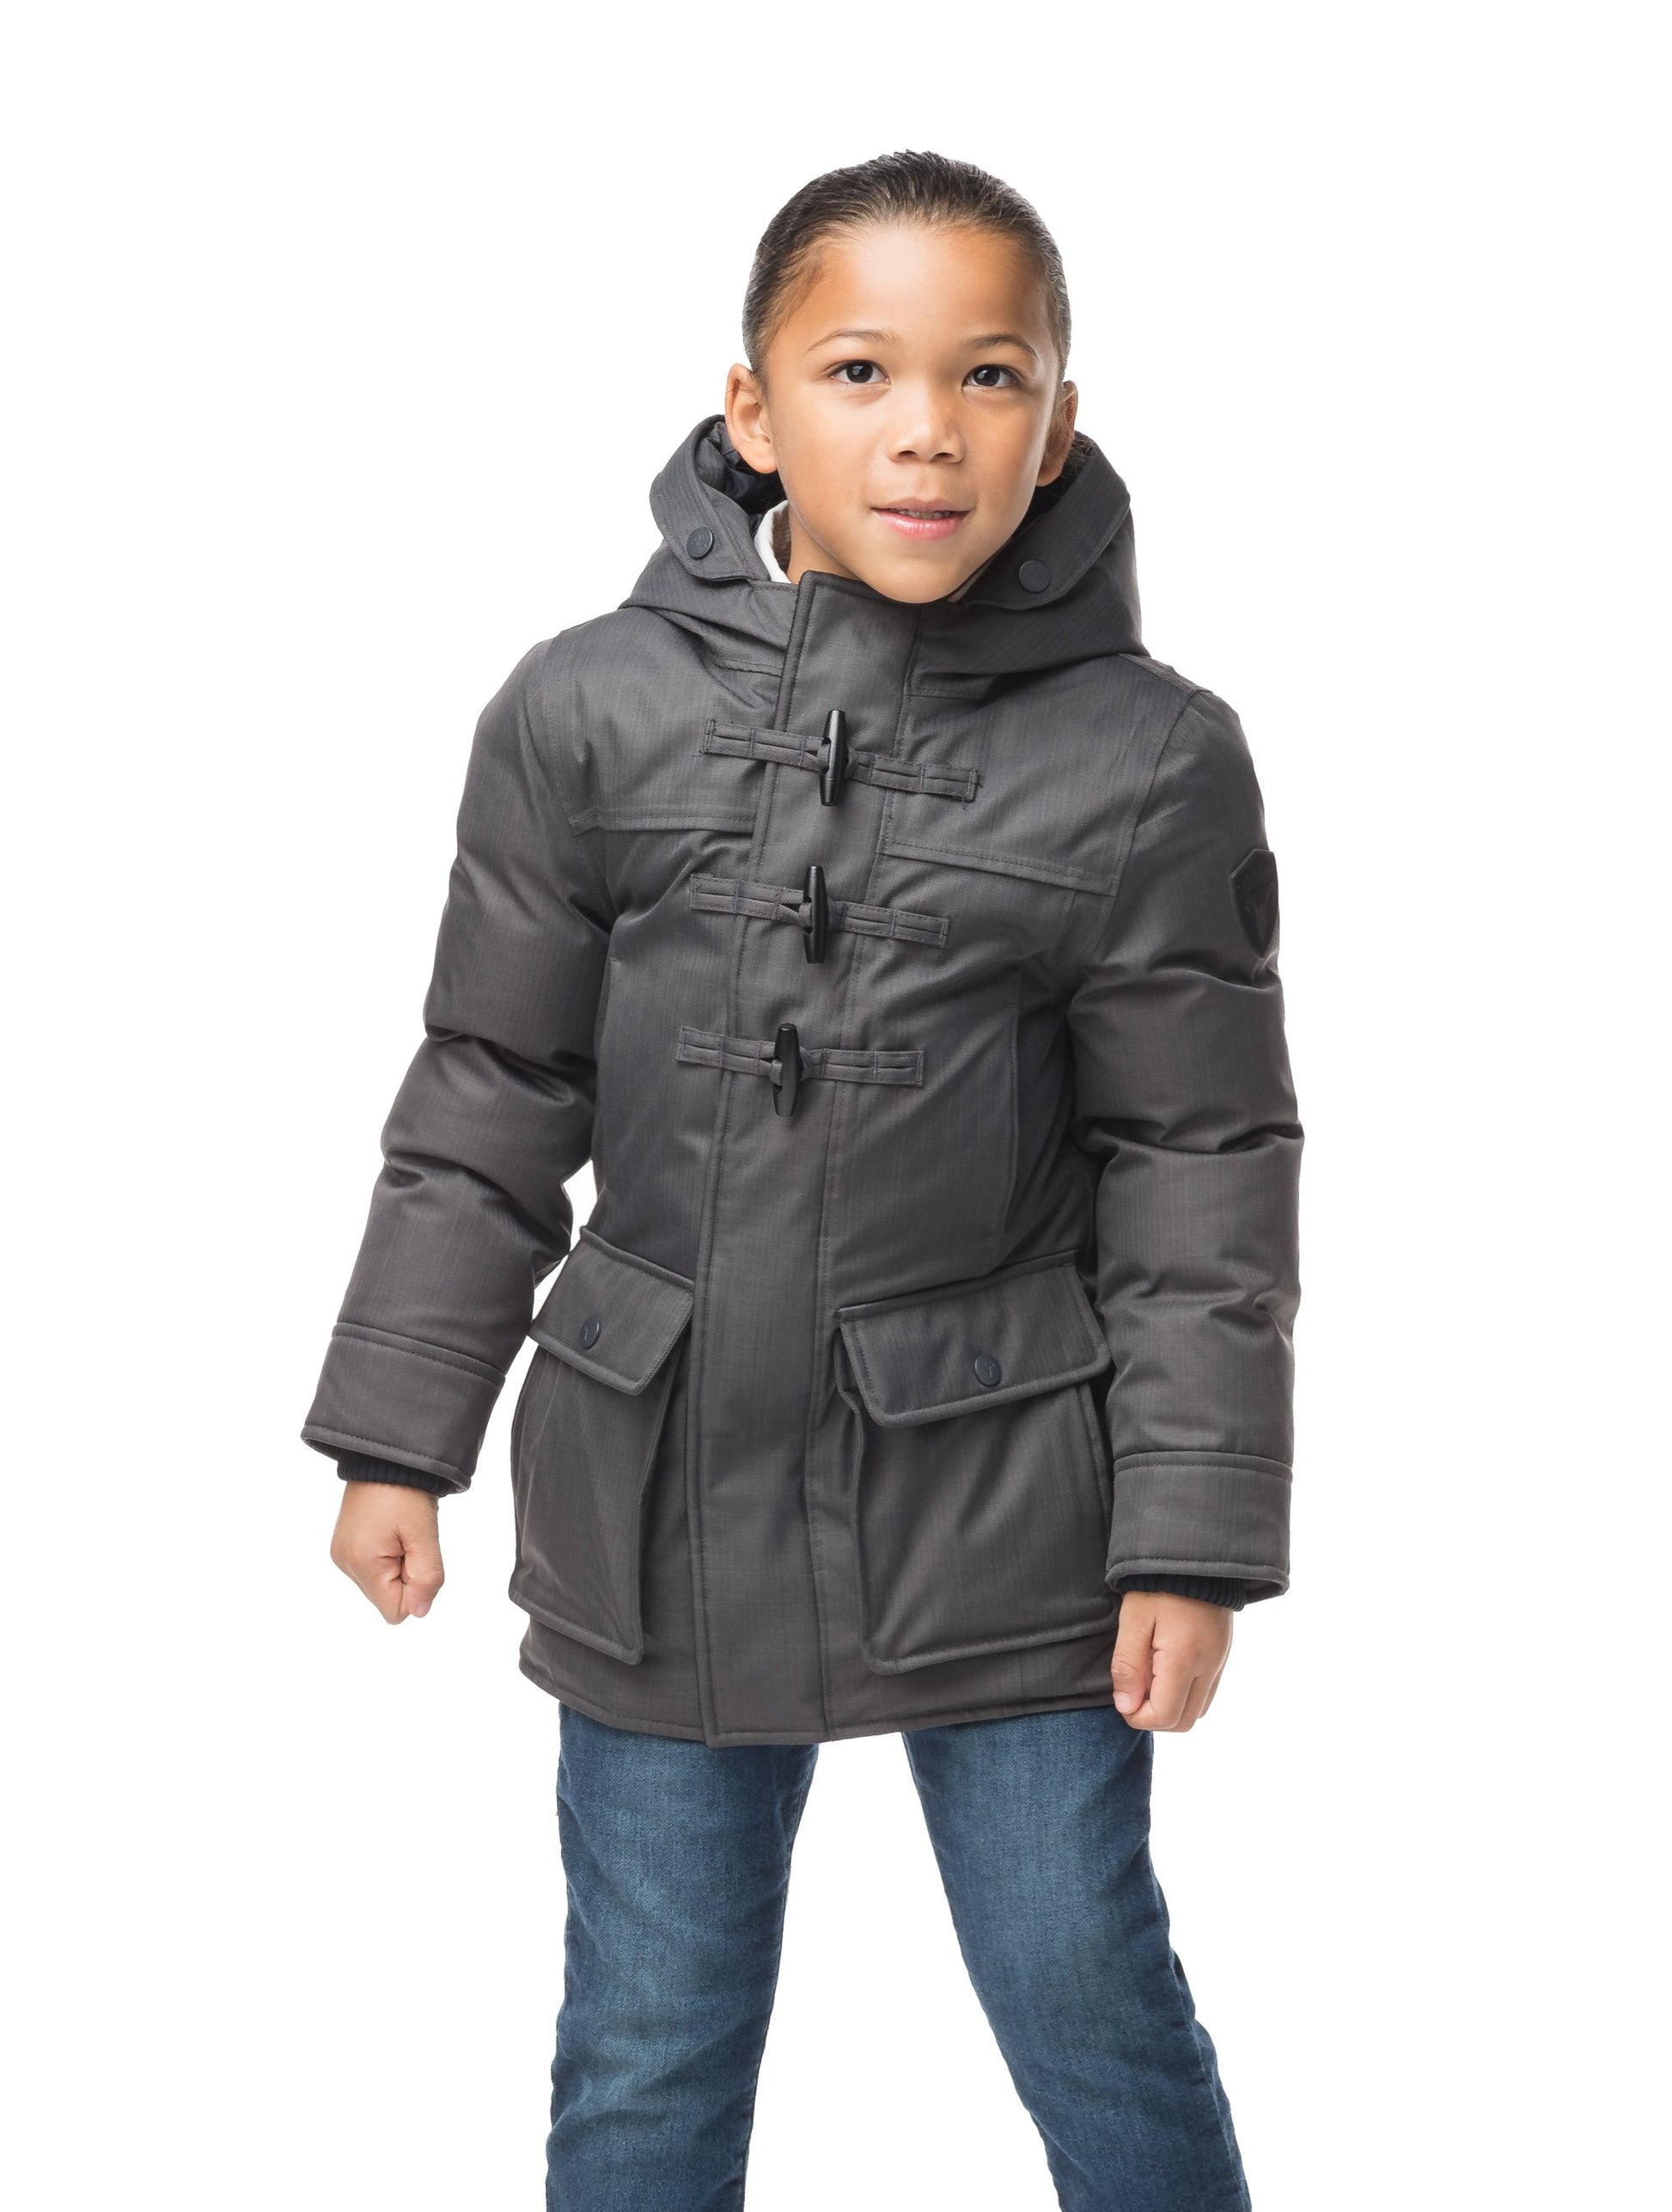 Kid's thigh high down coat with toggle closures in CH Steel Grey